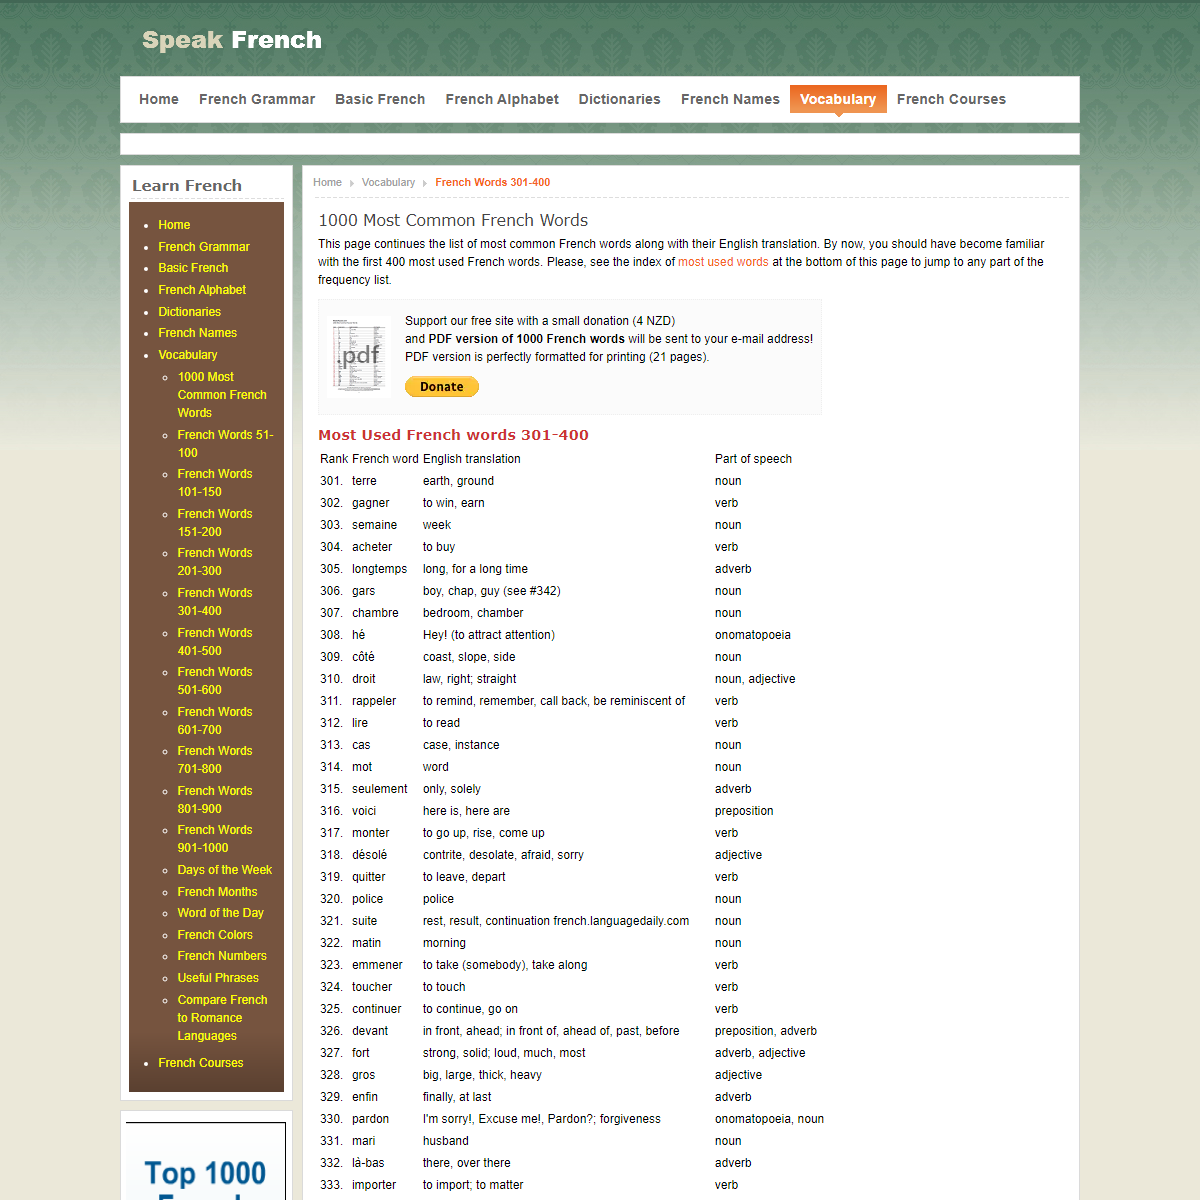 A complete backup of http://french.languagedaily.com/wordsandphrases/most-common-words-6